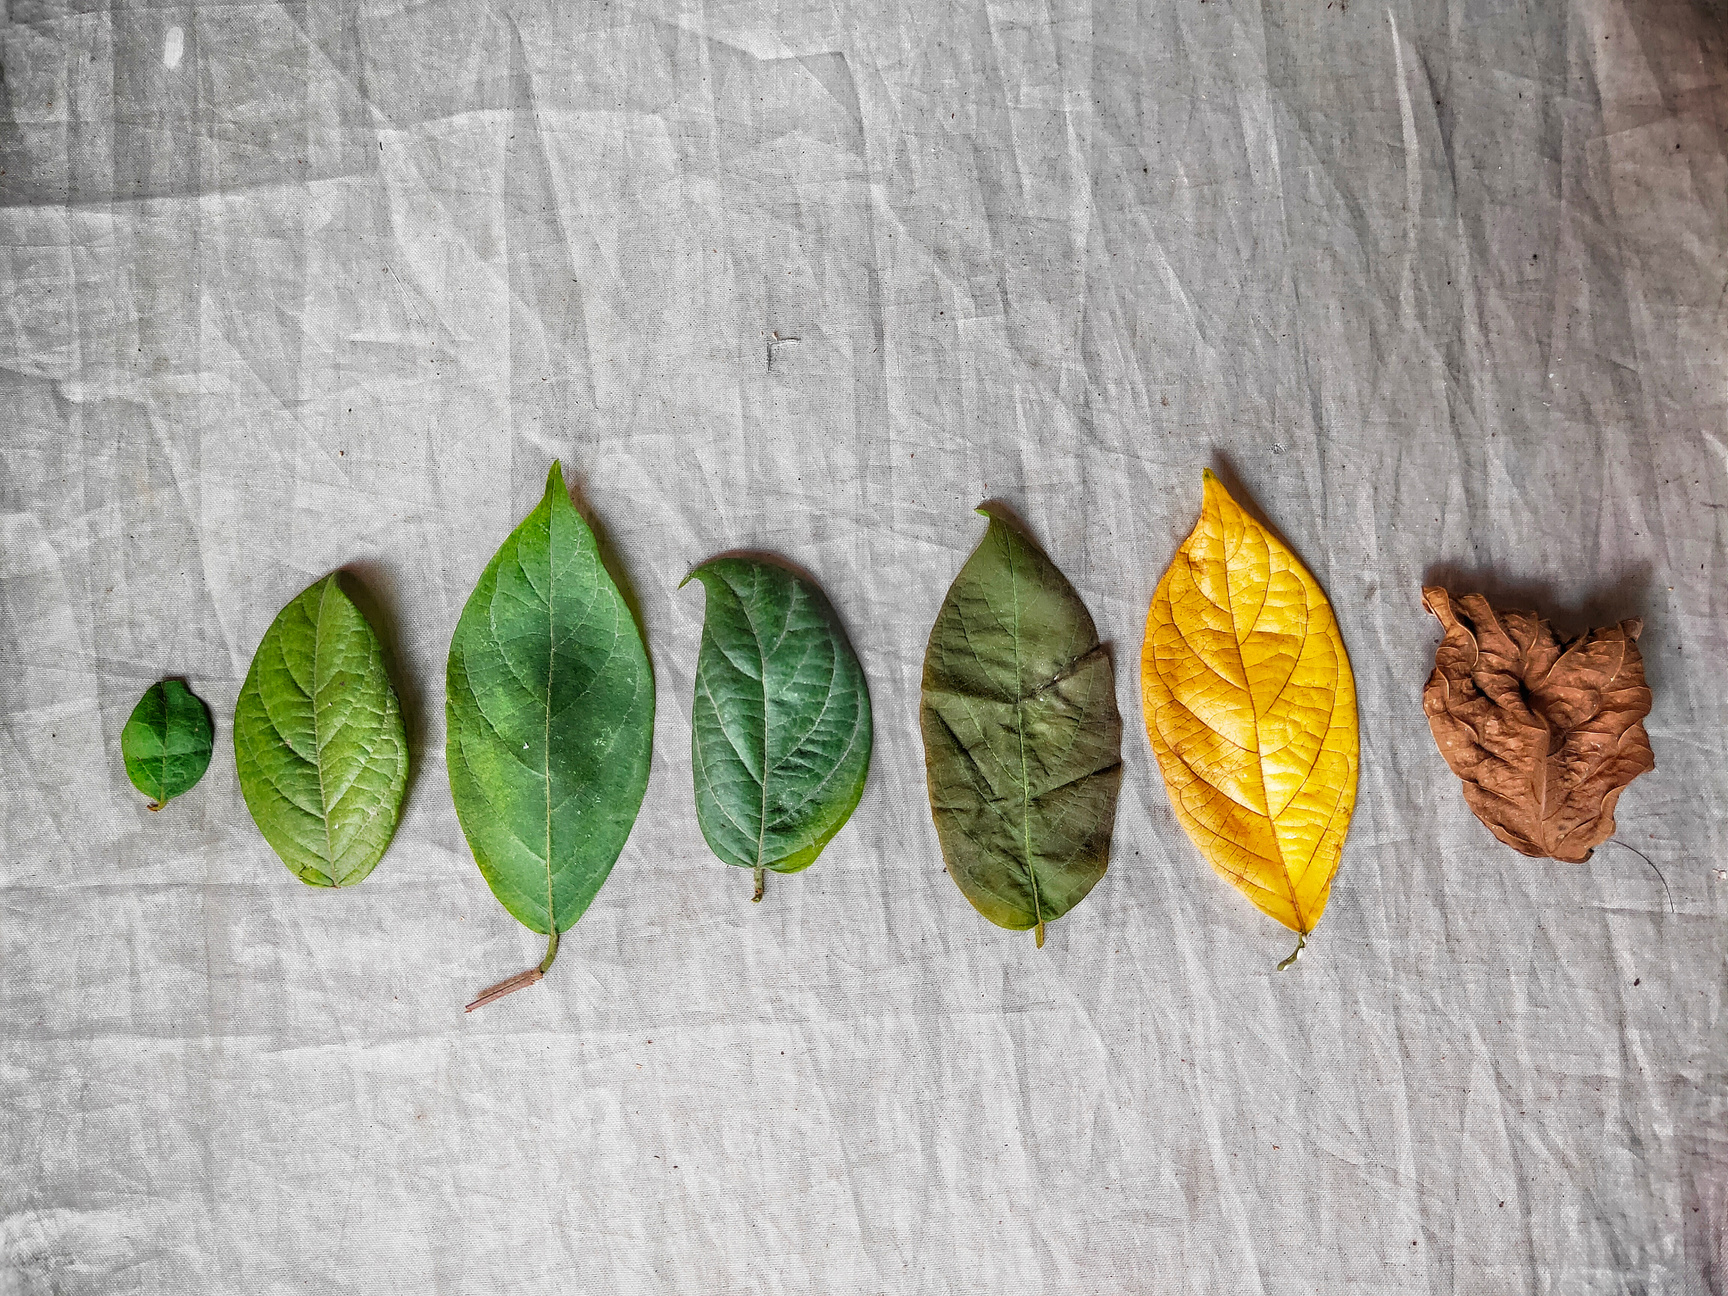 Life cycle of a leaf.